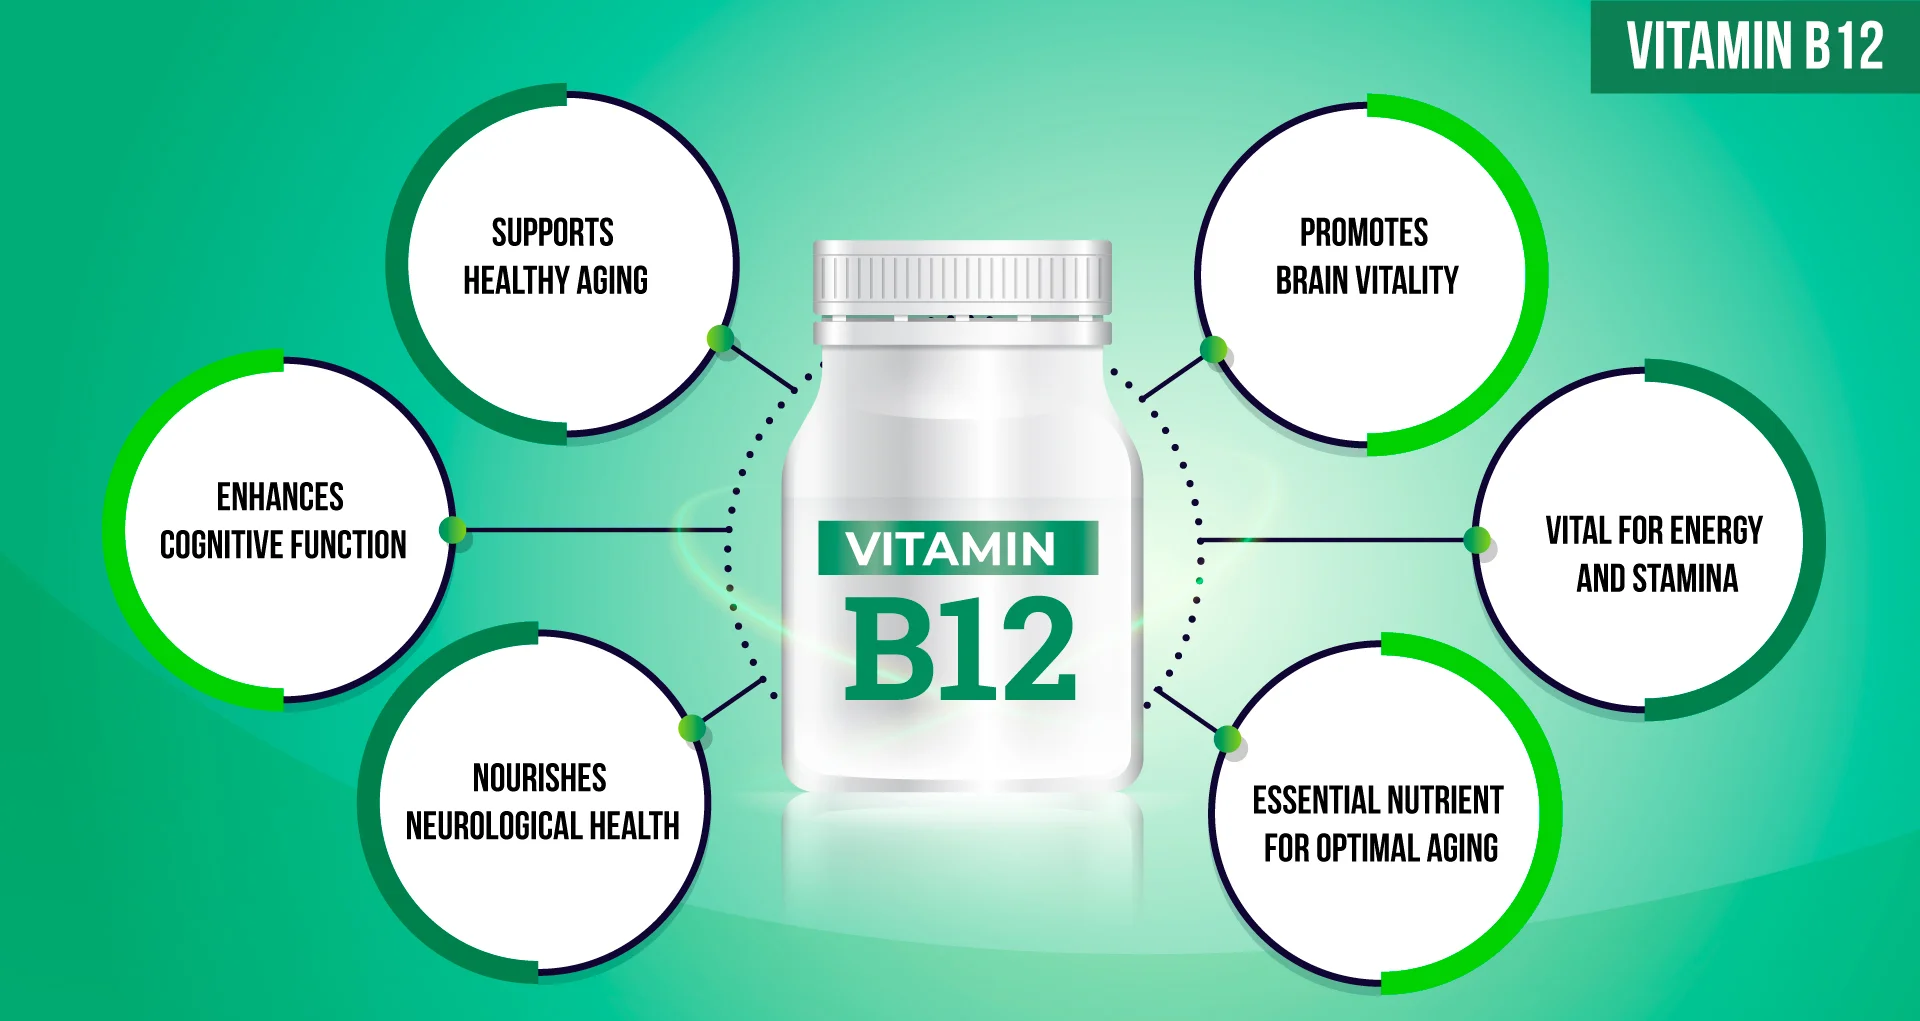 How Vitamin B12 Plays a Role in Healthy Aging and Cognitive Function: